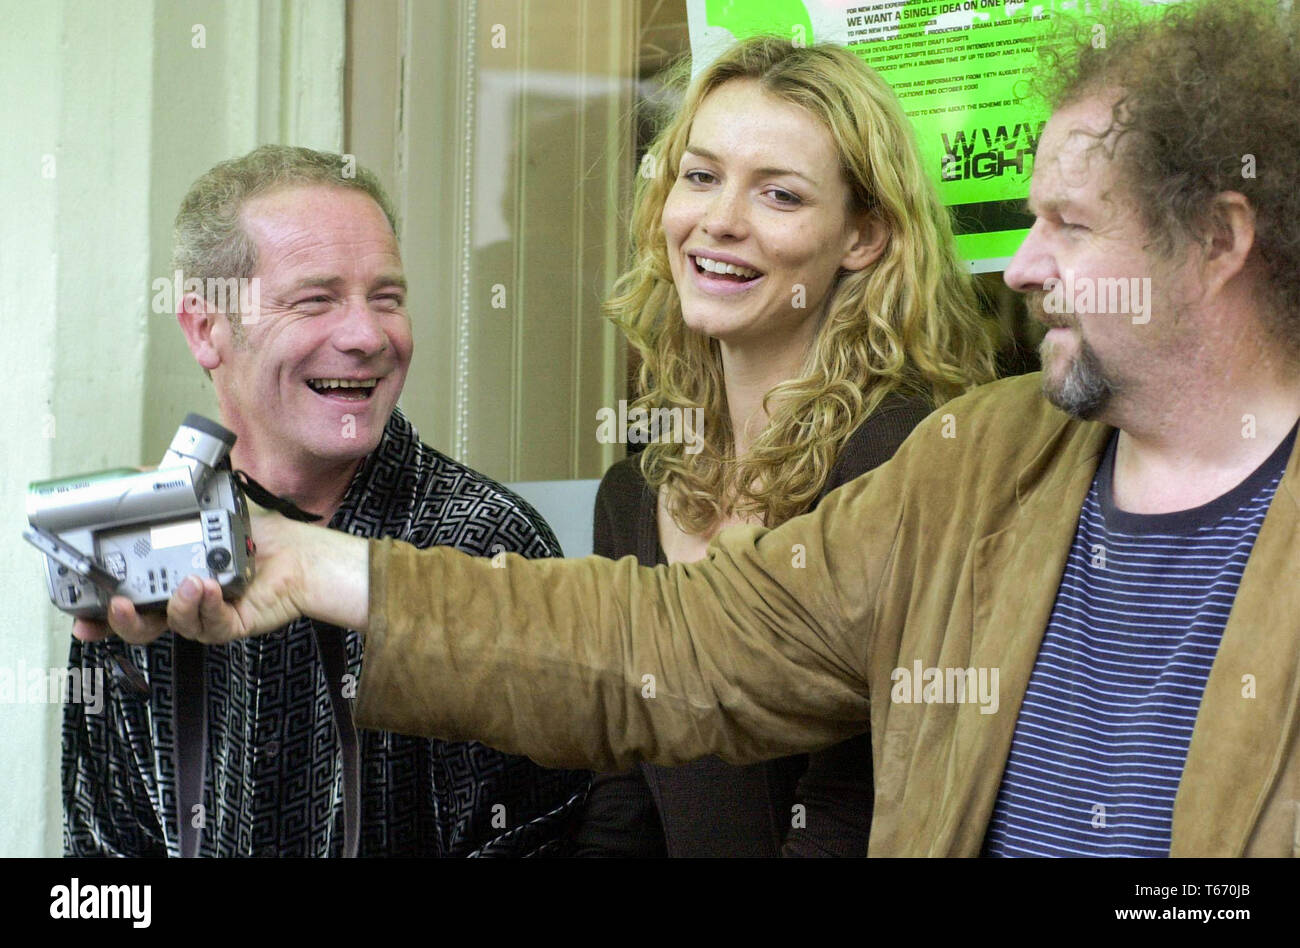 The launch of Antonine Short Film Factory's 8 1/2 Scottish Film Scheme at Favorit in Edinburgh today Wednesday 17/8/00. Stars of the film Miss Julie, Peter Mullan and Saffron Burrows are pictured with director Mike Figgis. Stock Photo